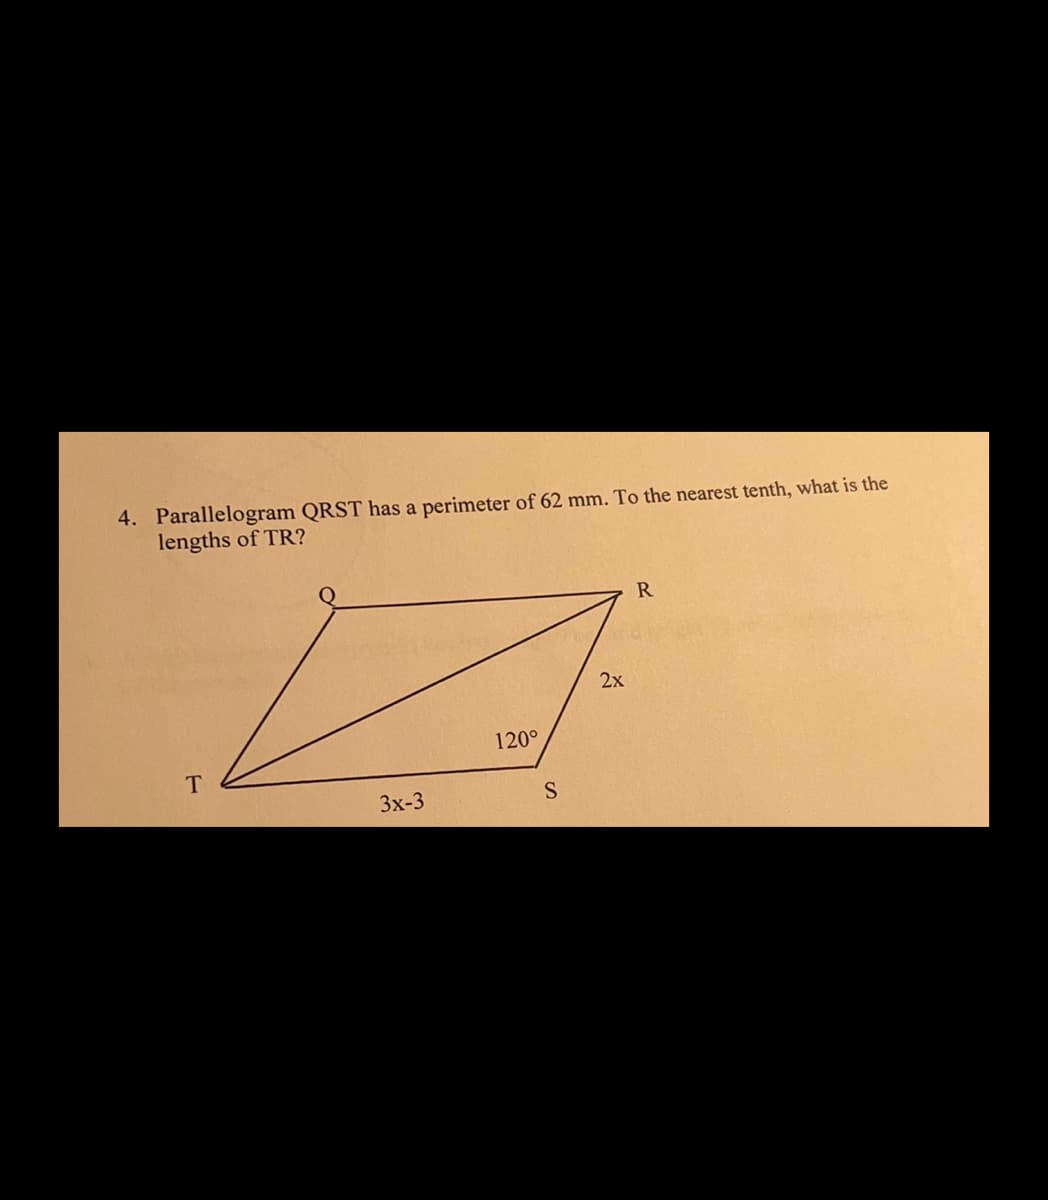 4. Parallelogram QRST has a perimeter of 62 mm. To the nearest tenth, what is the
lengths of TR?
R
120°
T
3x-3
S
2x